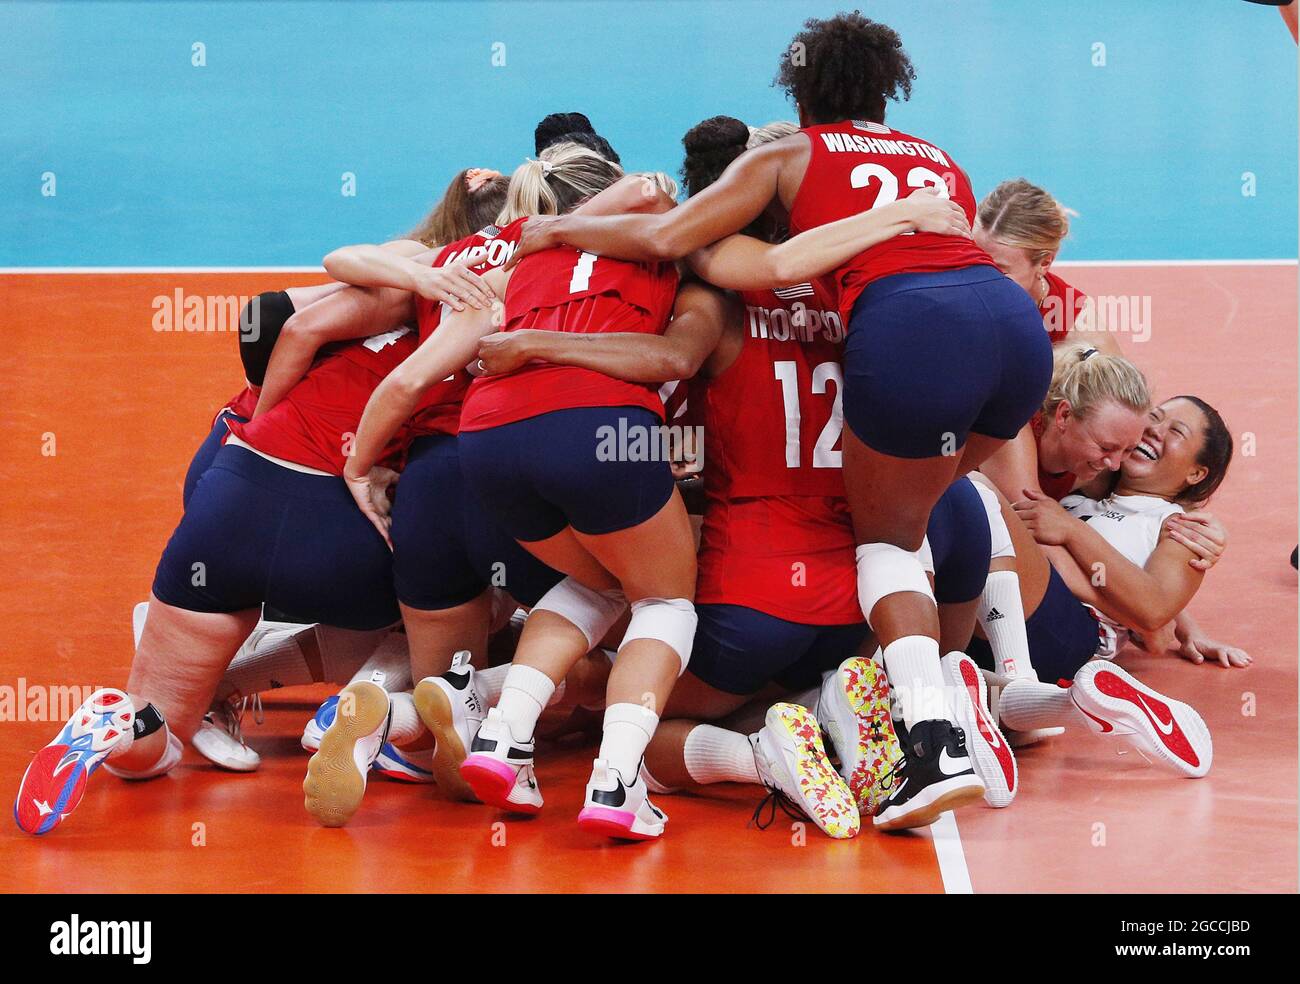 Tokyo, Japan. 08th Aug, 2021. The USA team celebrates after defeating Brazil in straight sets, 25-21, 25-20 and 25-14 to win the gold medal in Women's Volleyball at the Tokyo Summer Olympics in Tokyo, Japan, on Sunday, August 8, 2021. Photo by Bob Strong/UPI. Credit: UPI/Alamy Live News Stock Photo